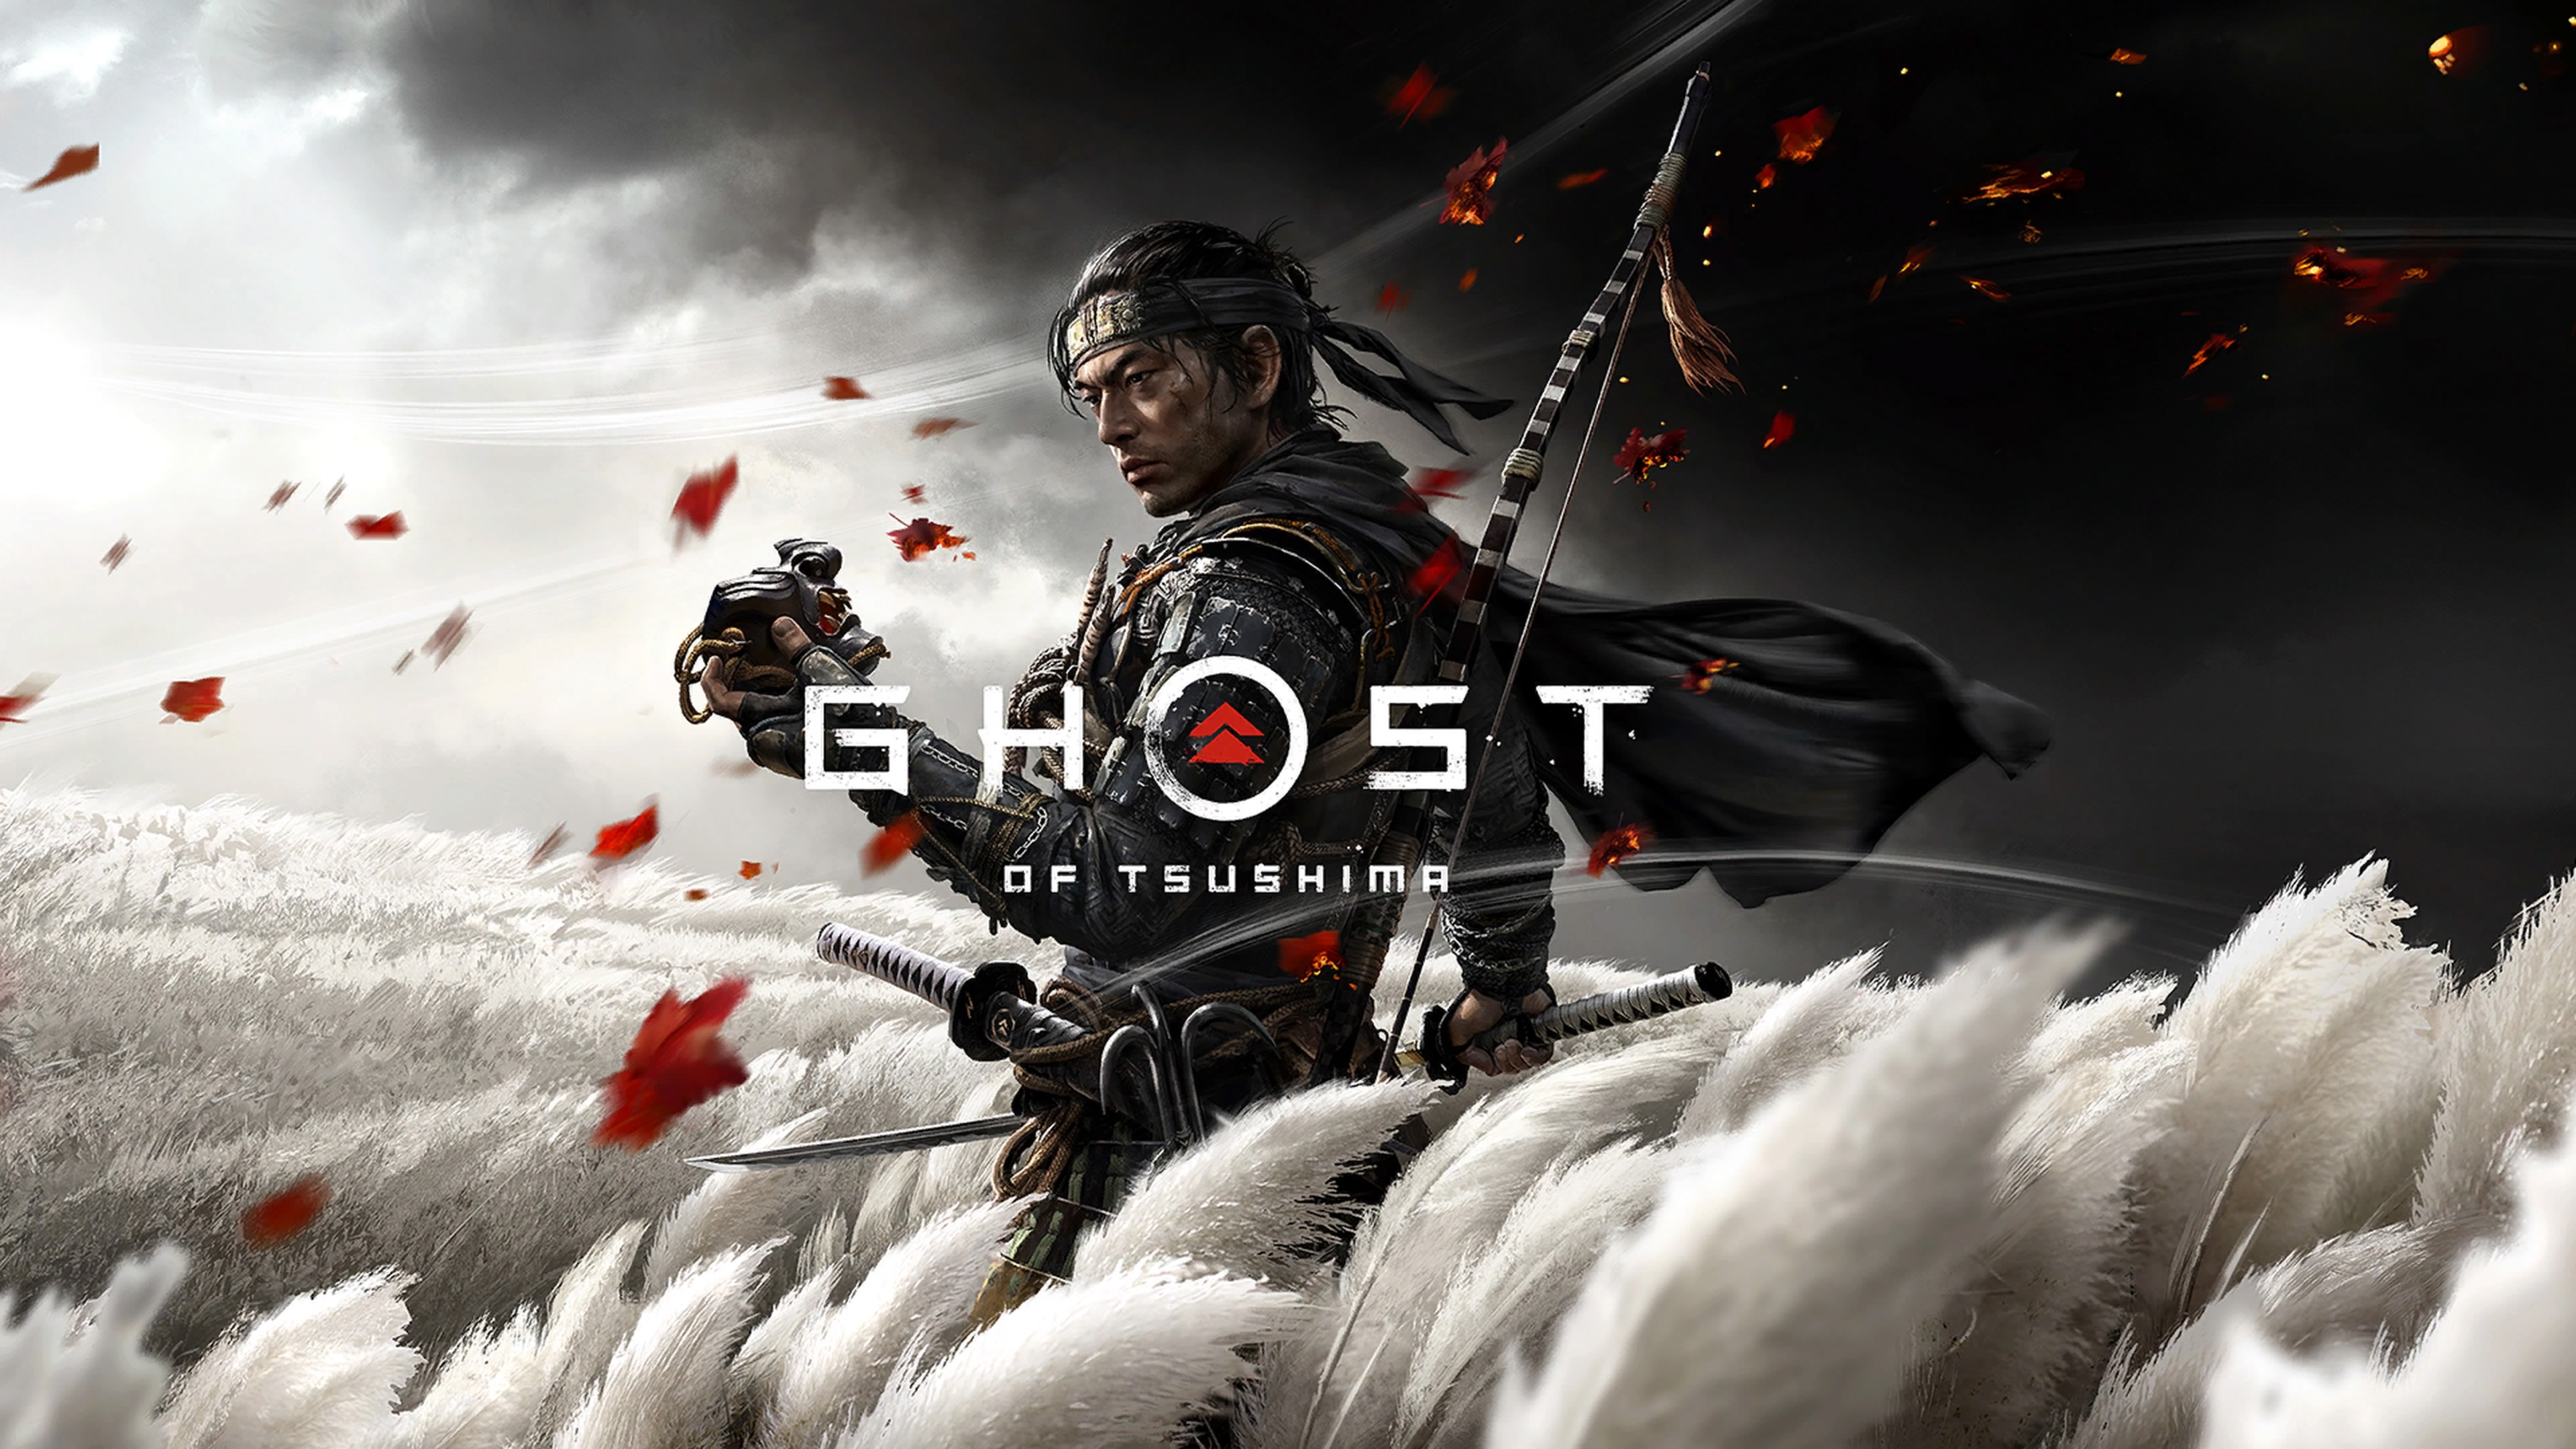 Bloodborne, Horizon, God of War et Shadow of the Colossus s'invitent... dans Ghost of Tsushima